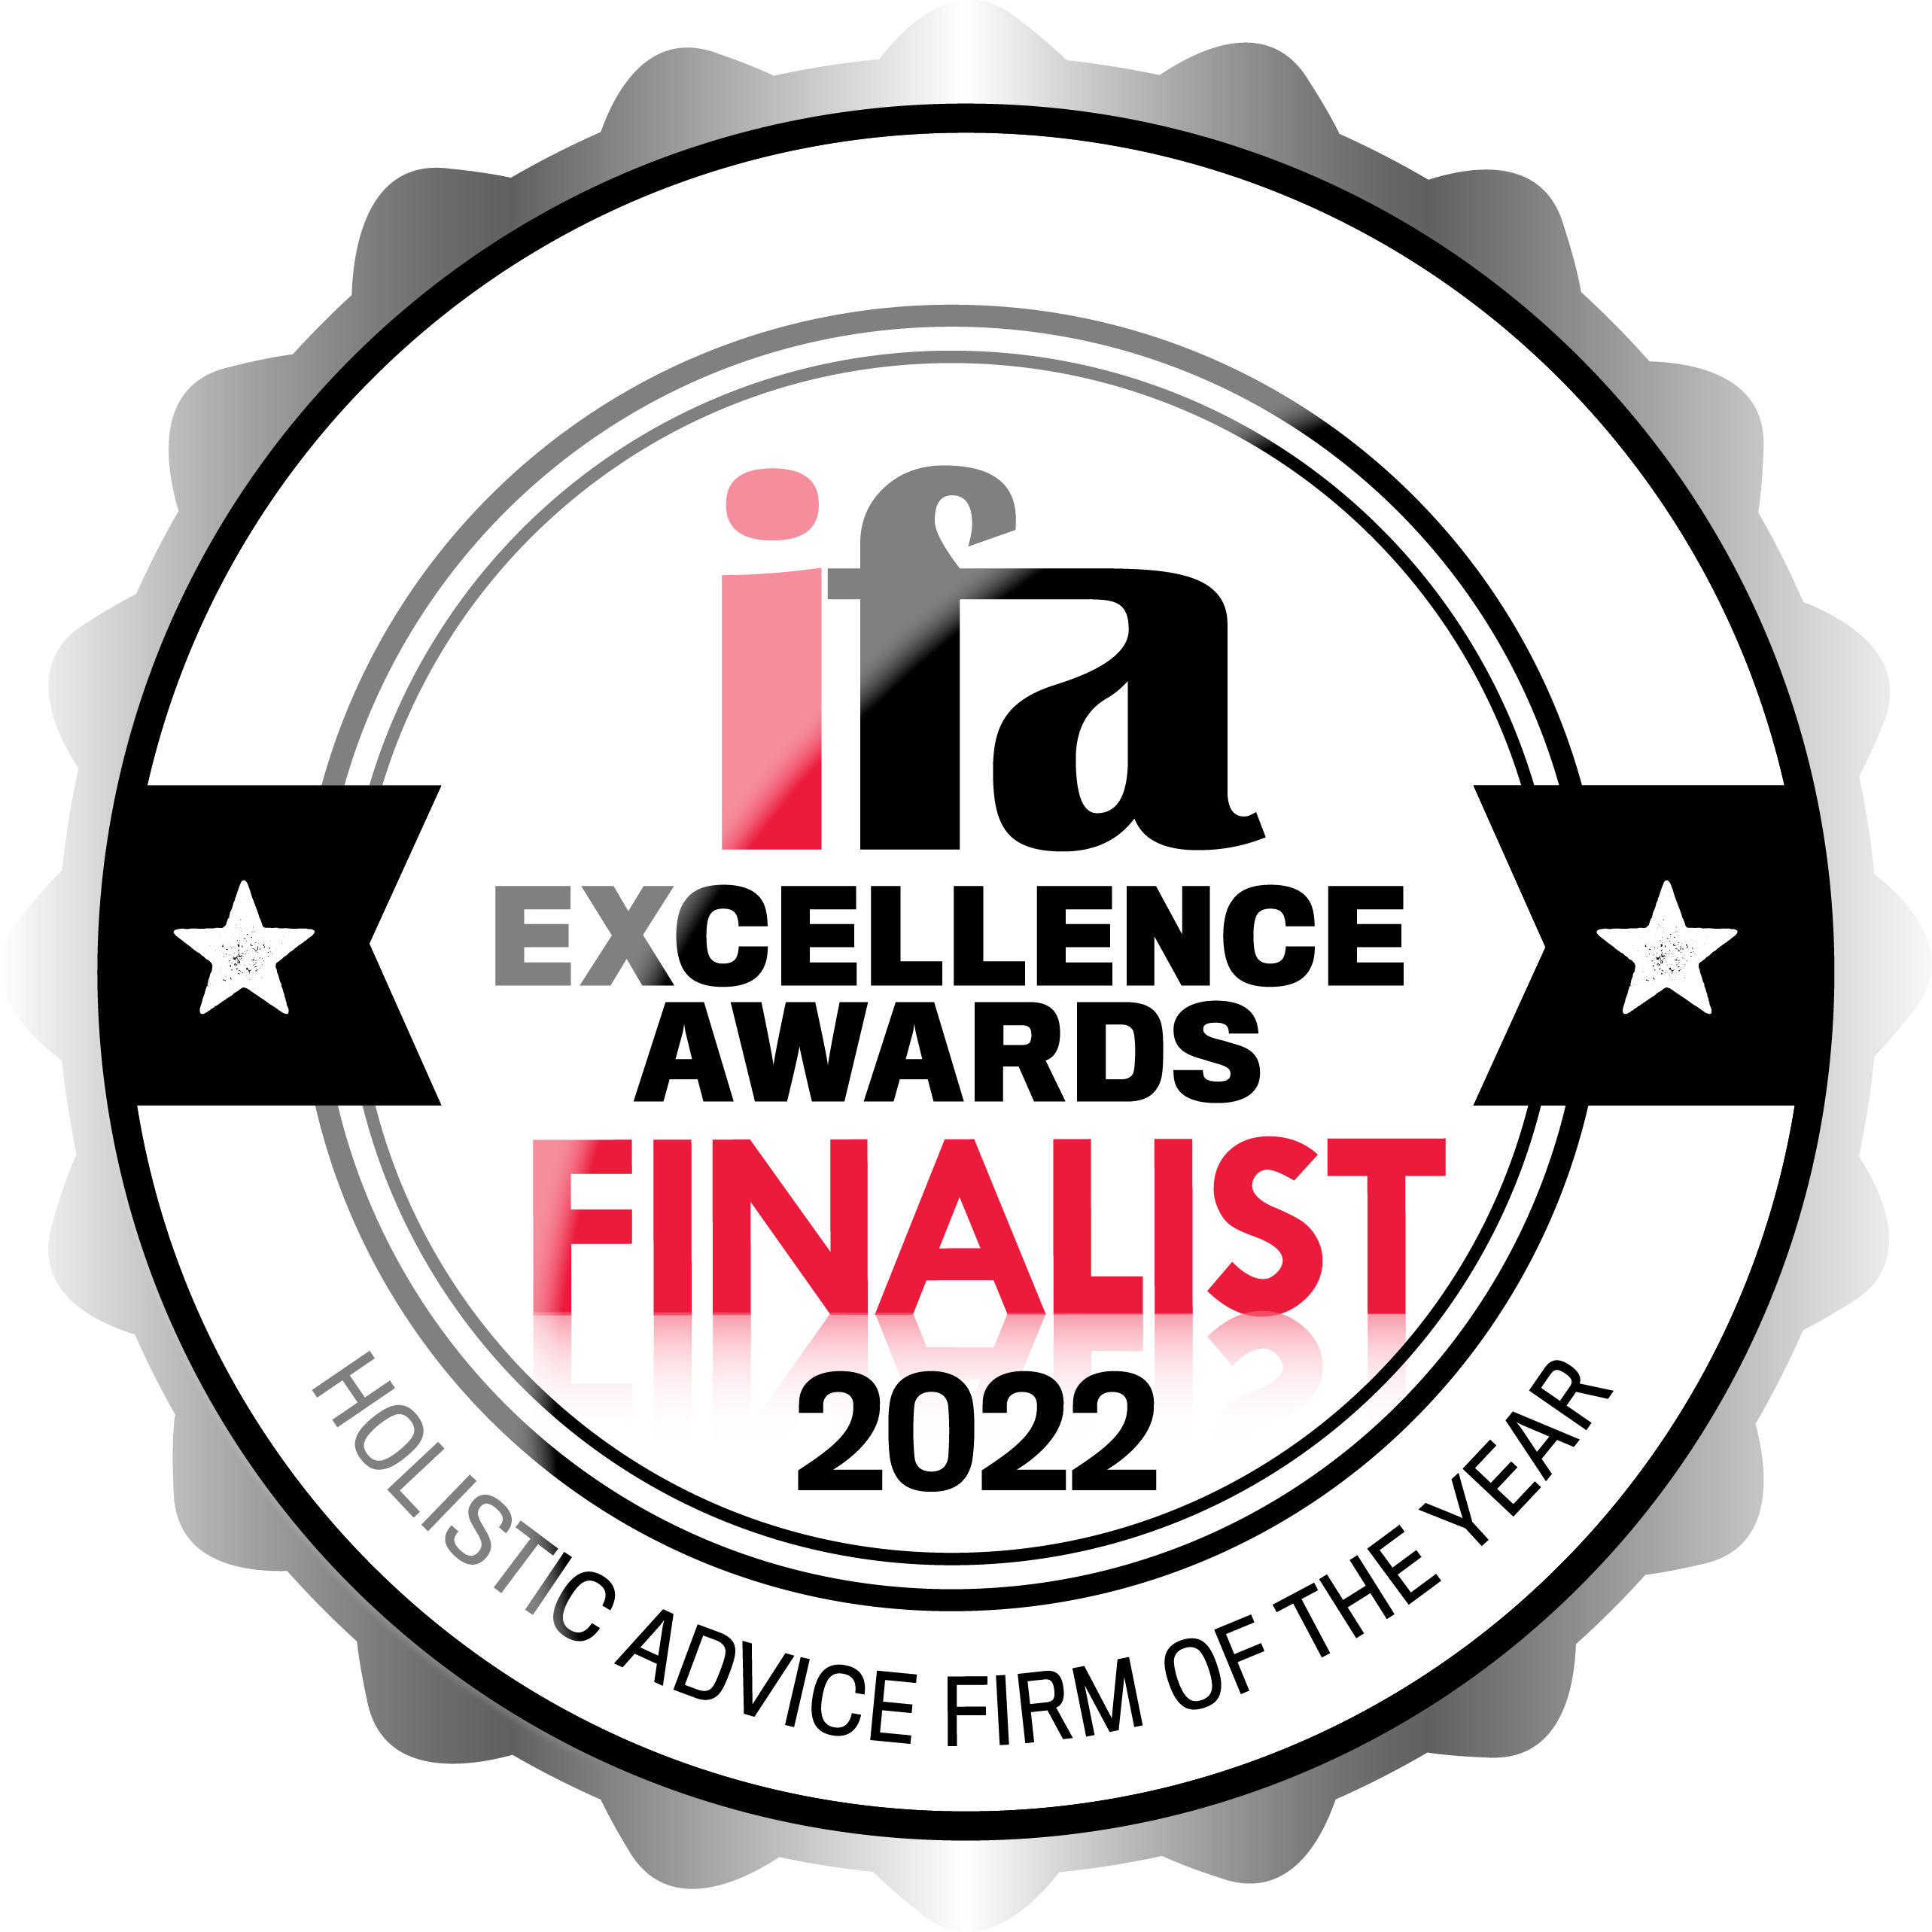 IFA Excellence Awards FINALIST – Holistic Advice Firm of the Year 2022